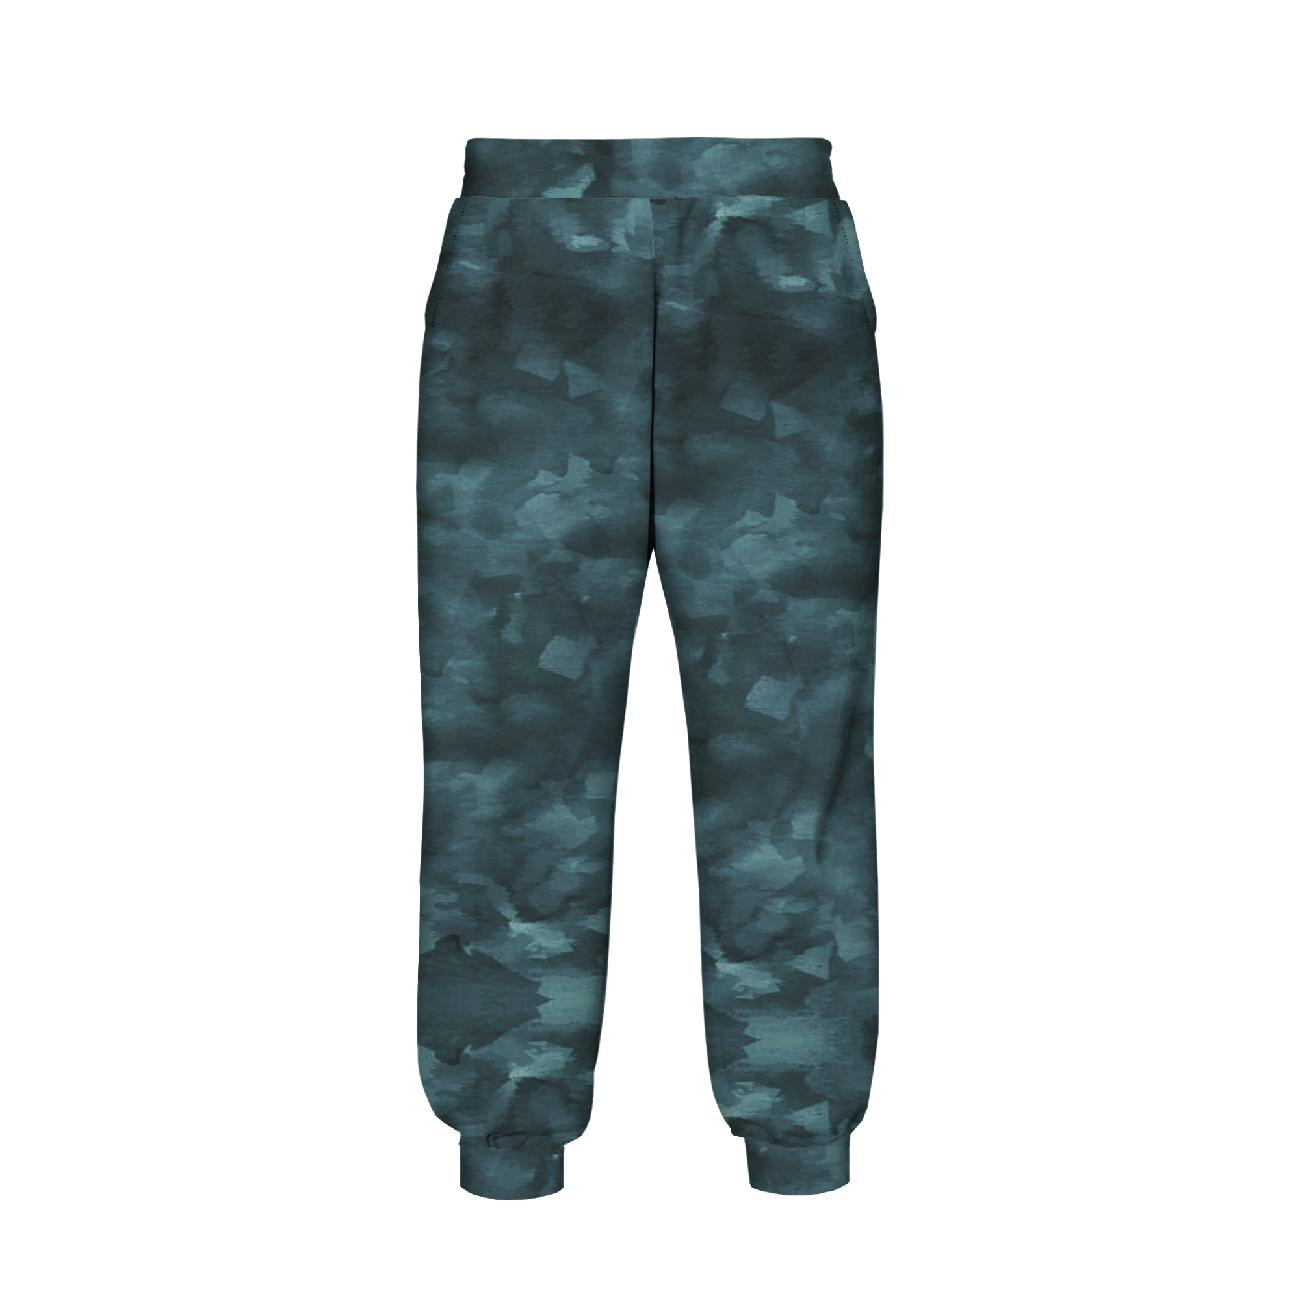 KID'S JOGGERS (ROBIN) - CAMOUFLAGE pat. 2 / emerald - sewing set